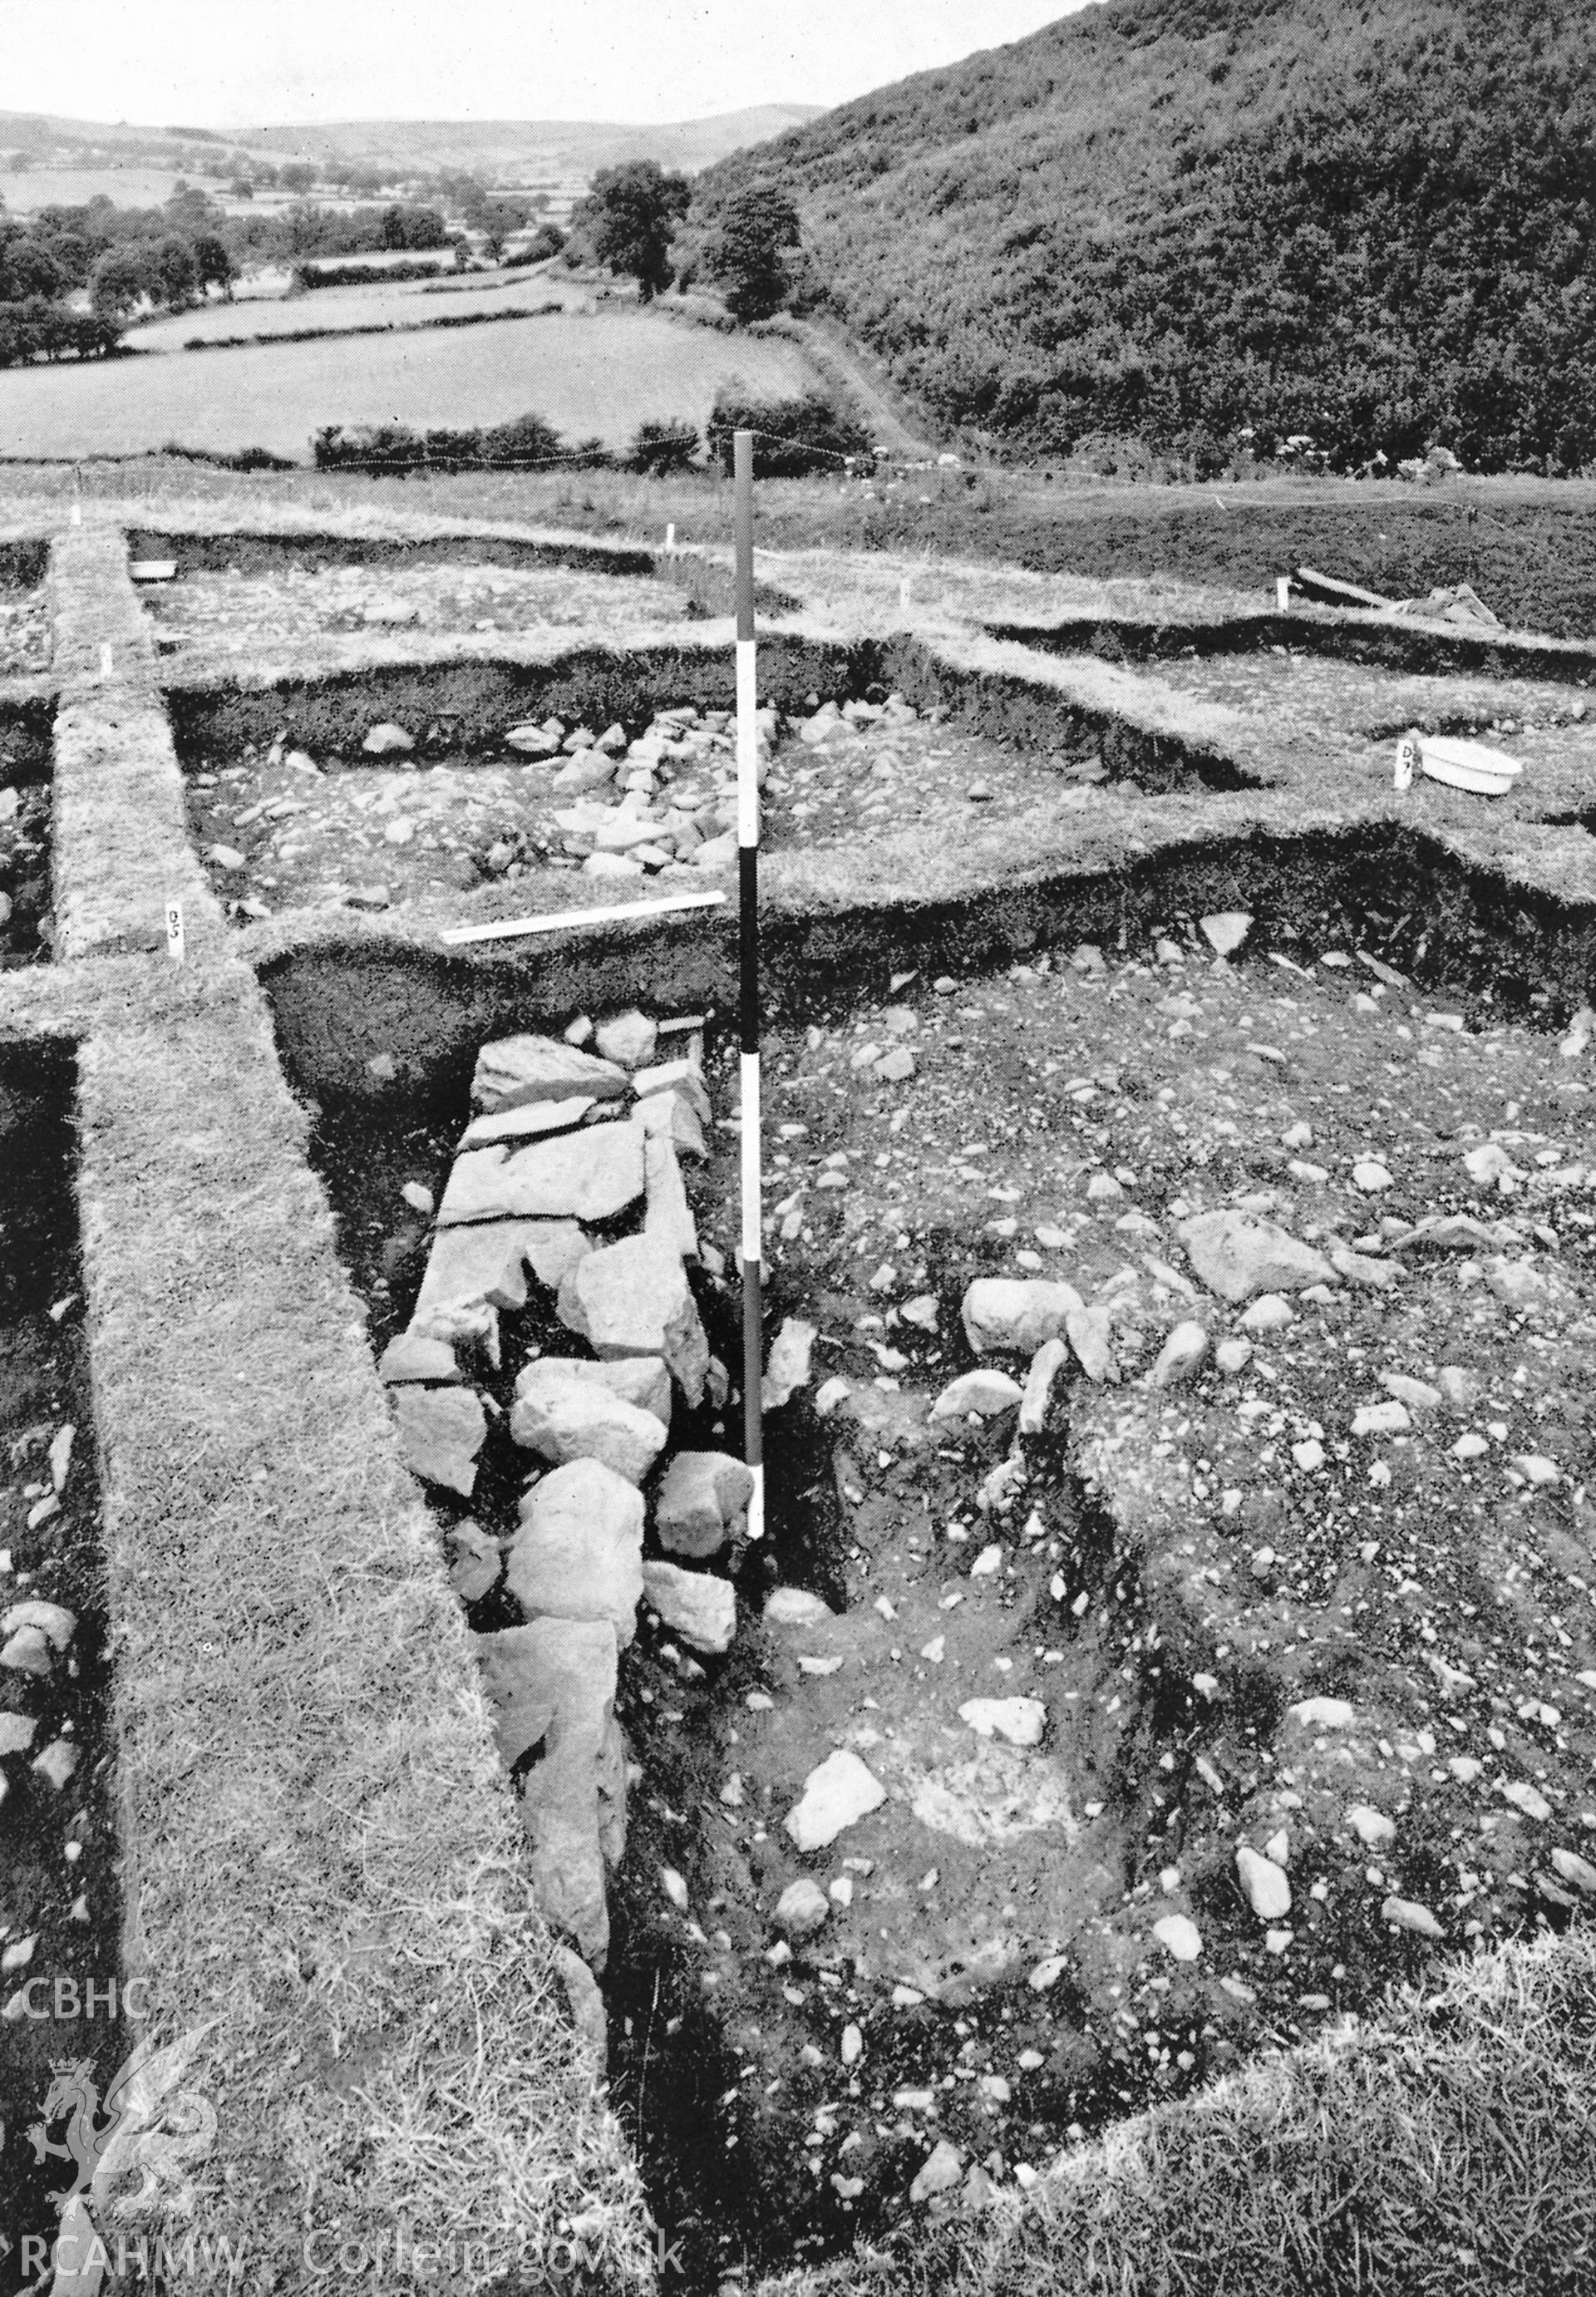 View of excavations on the motte of Sycharth Castle in 1963, showing sleeper wall forming east side of hall or west building. From D.B.Hague Sycharth Collection.